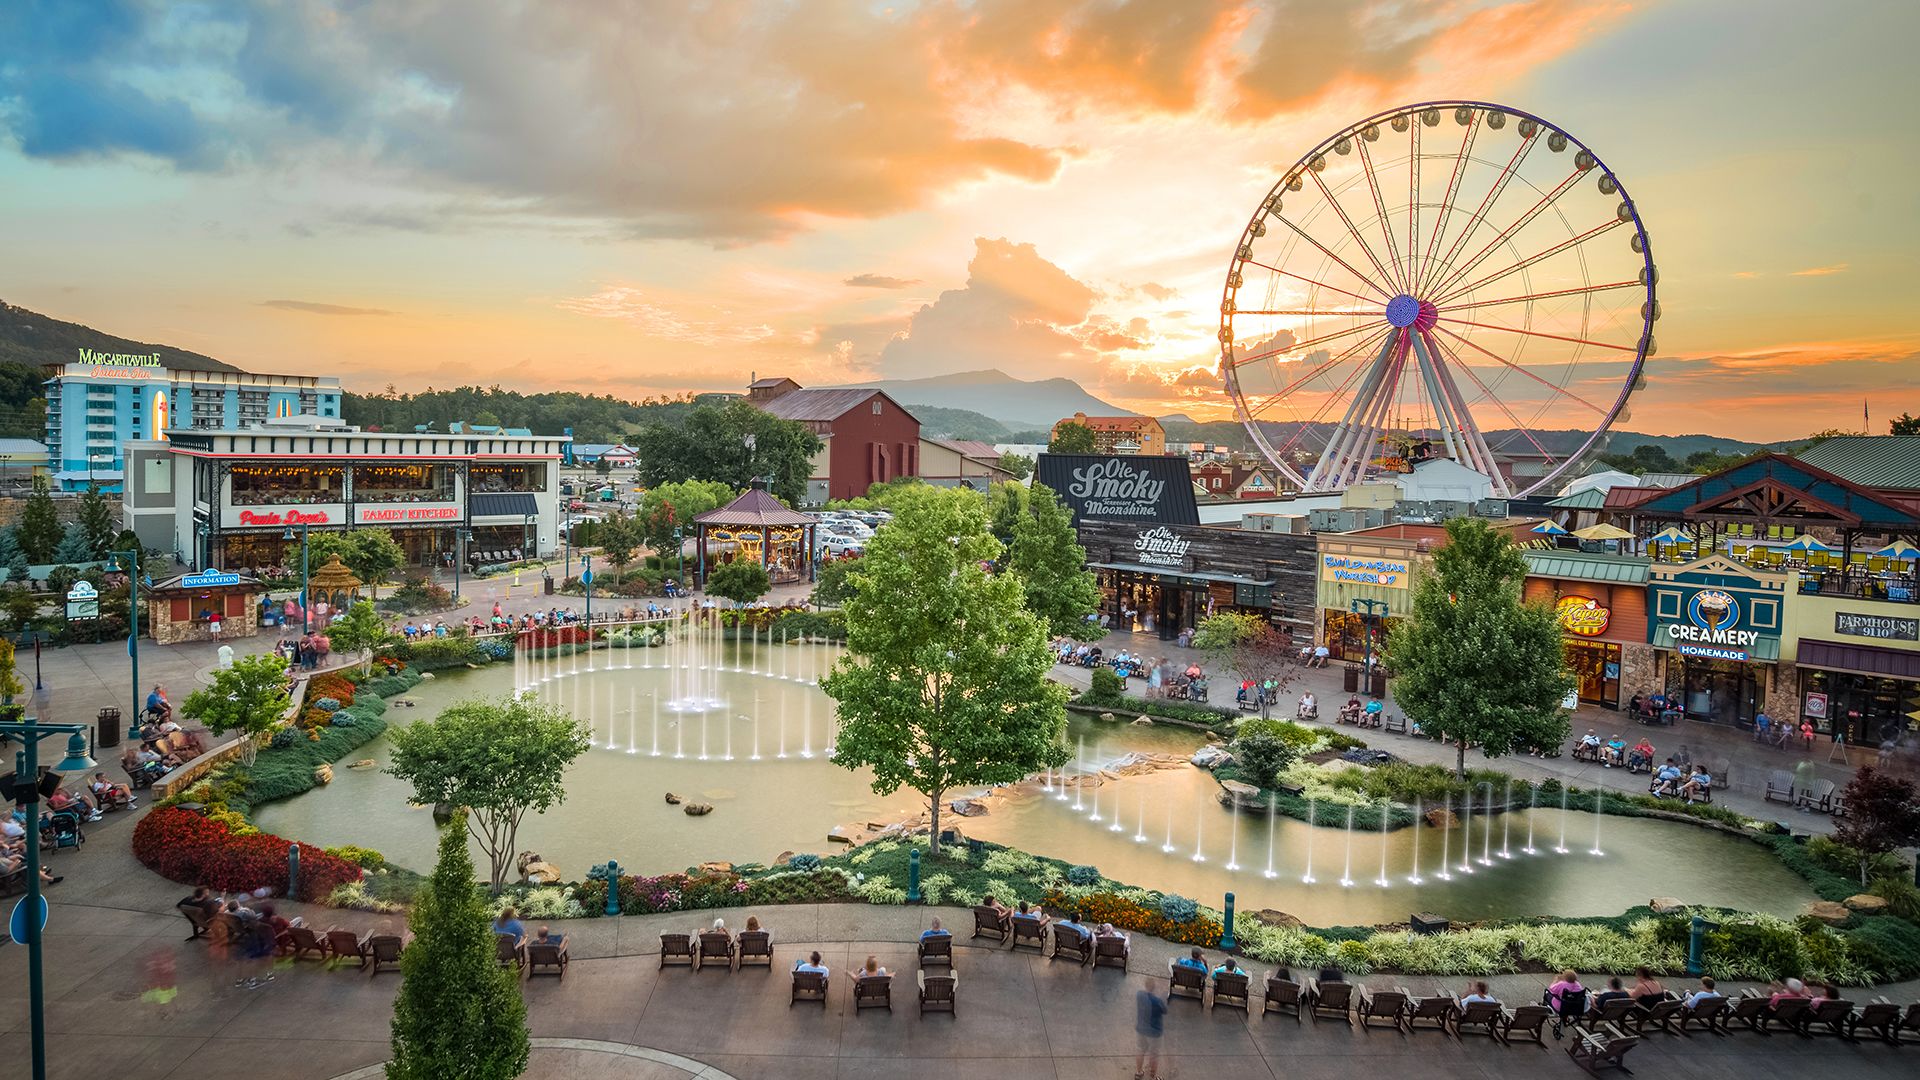 Things to Do for Couples in Pigeon Forge, TN